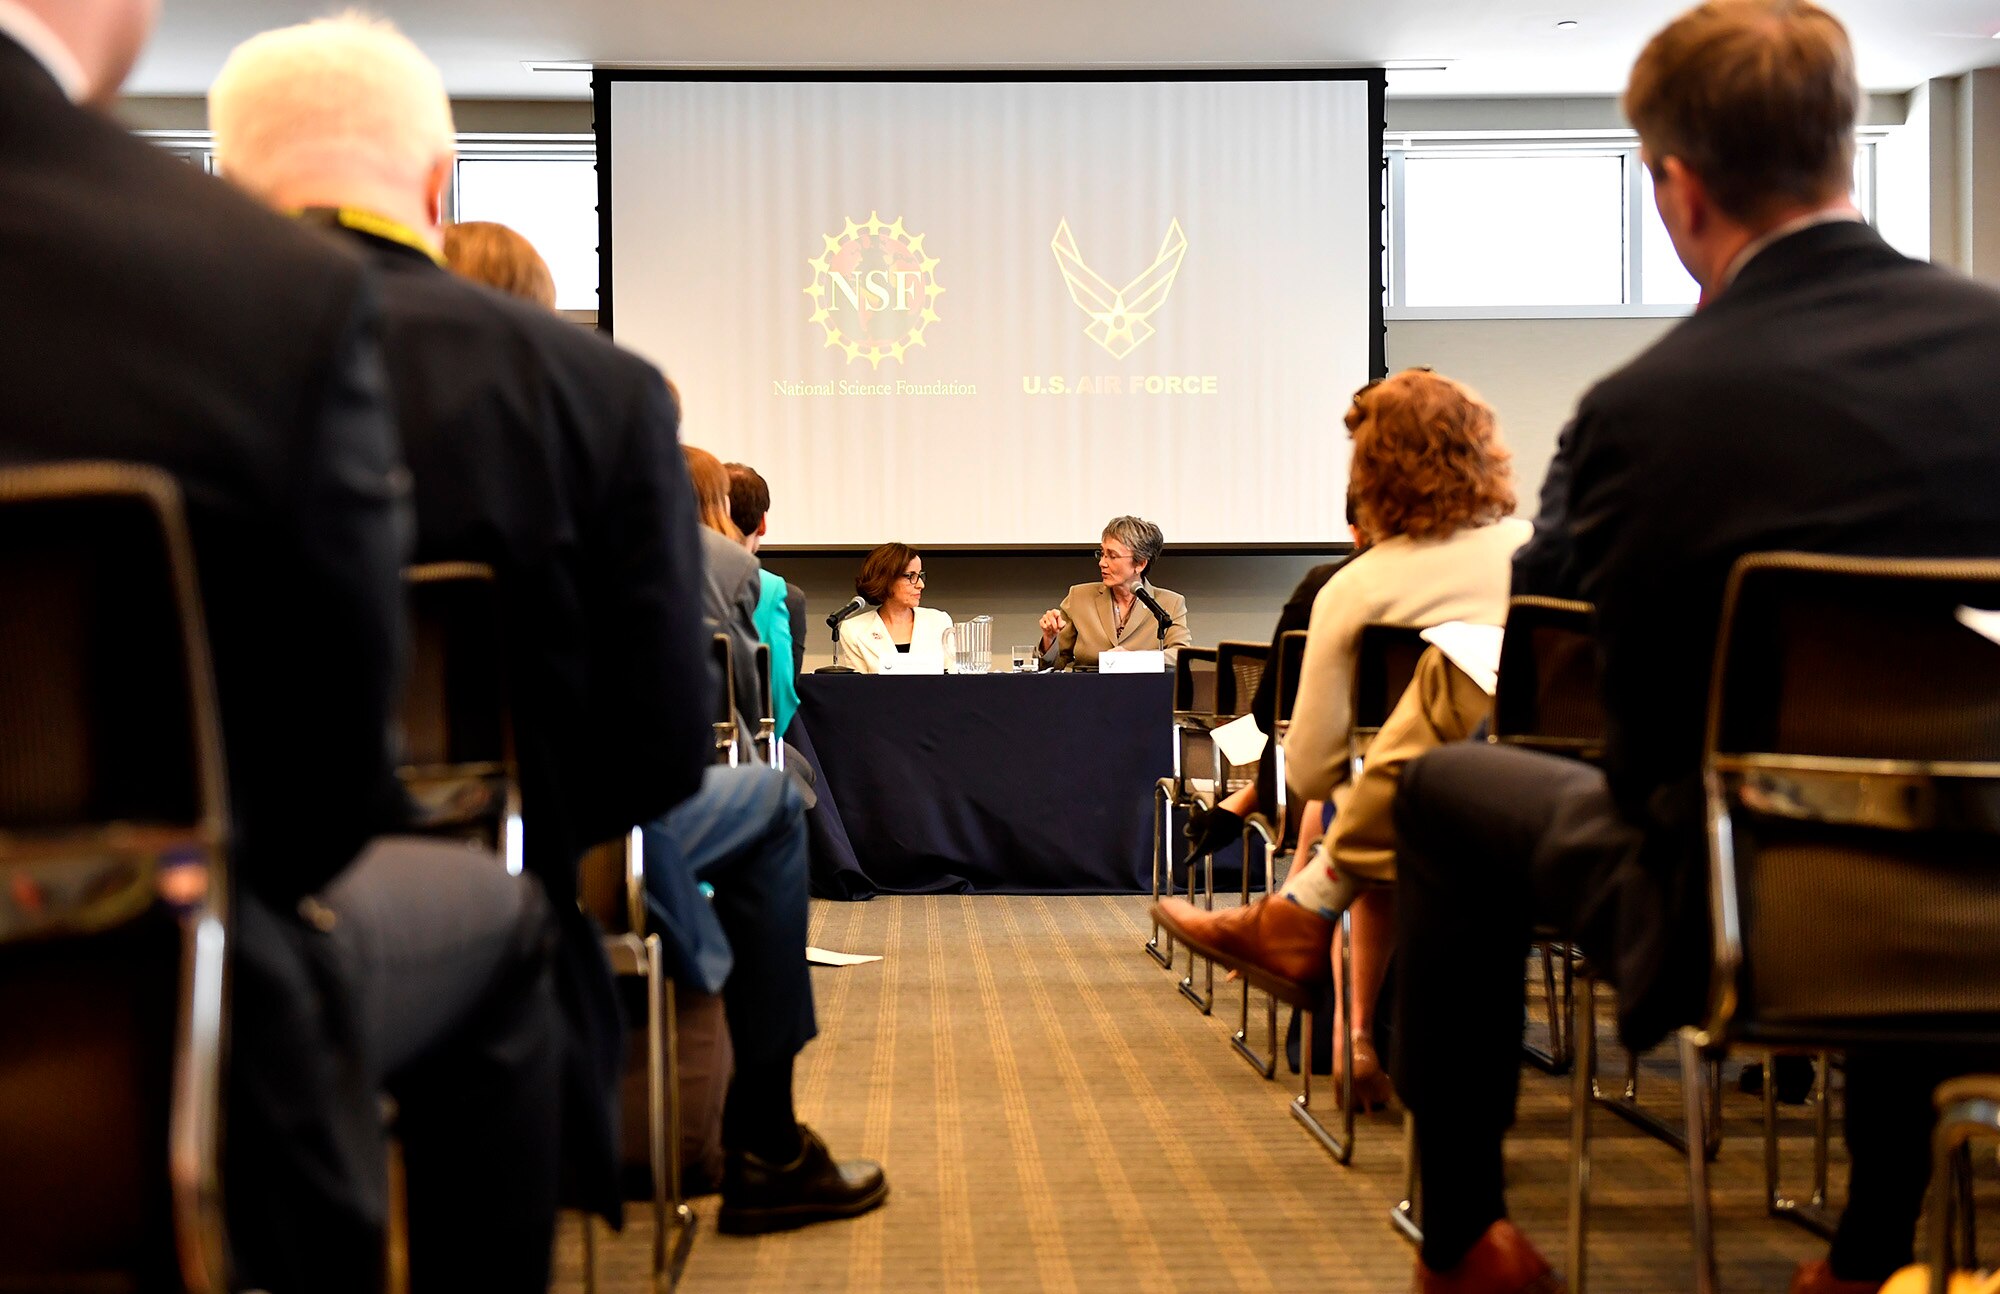 Secretary of the Air Force Heather Wilson and National Science Foundation Director France Córdova answer questions after signing a letter of intent in Washington, D.C., May 9, 2018. The letter of intent initiates a strategic partnership focused on research in four areas of common interest: space operations and geosciences, advanced material sciences, information and data sciences, and workforce and processes. (U.S. Air Force photo by Staff Sgt. Rusty Frank)